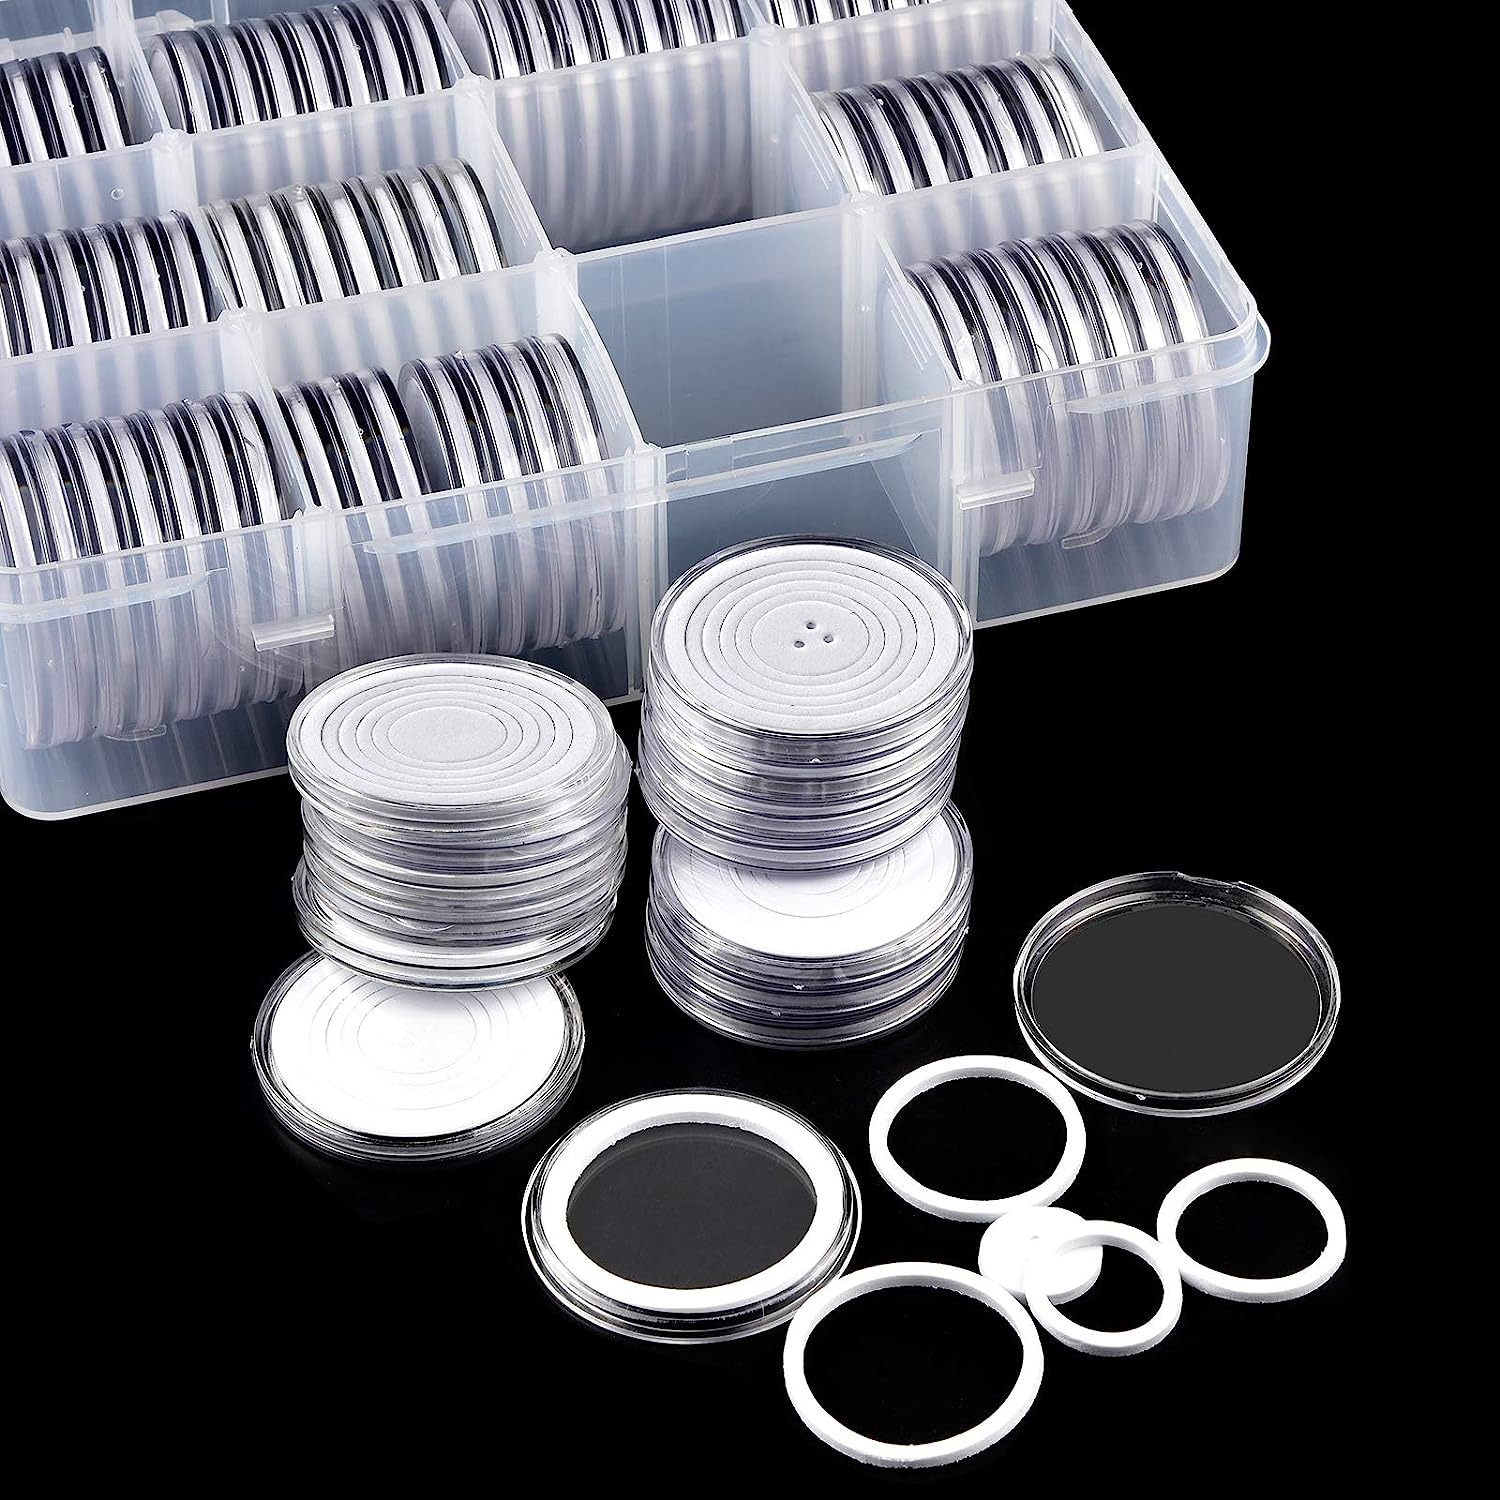 Fullcase Coin Collection Supplies Holders for Collectors, 84 Pieces 46mm Coins Capsules with Foam Gasket and Plastic Storage Organizer Box, 6 Sizes